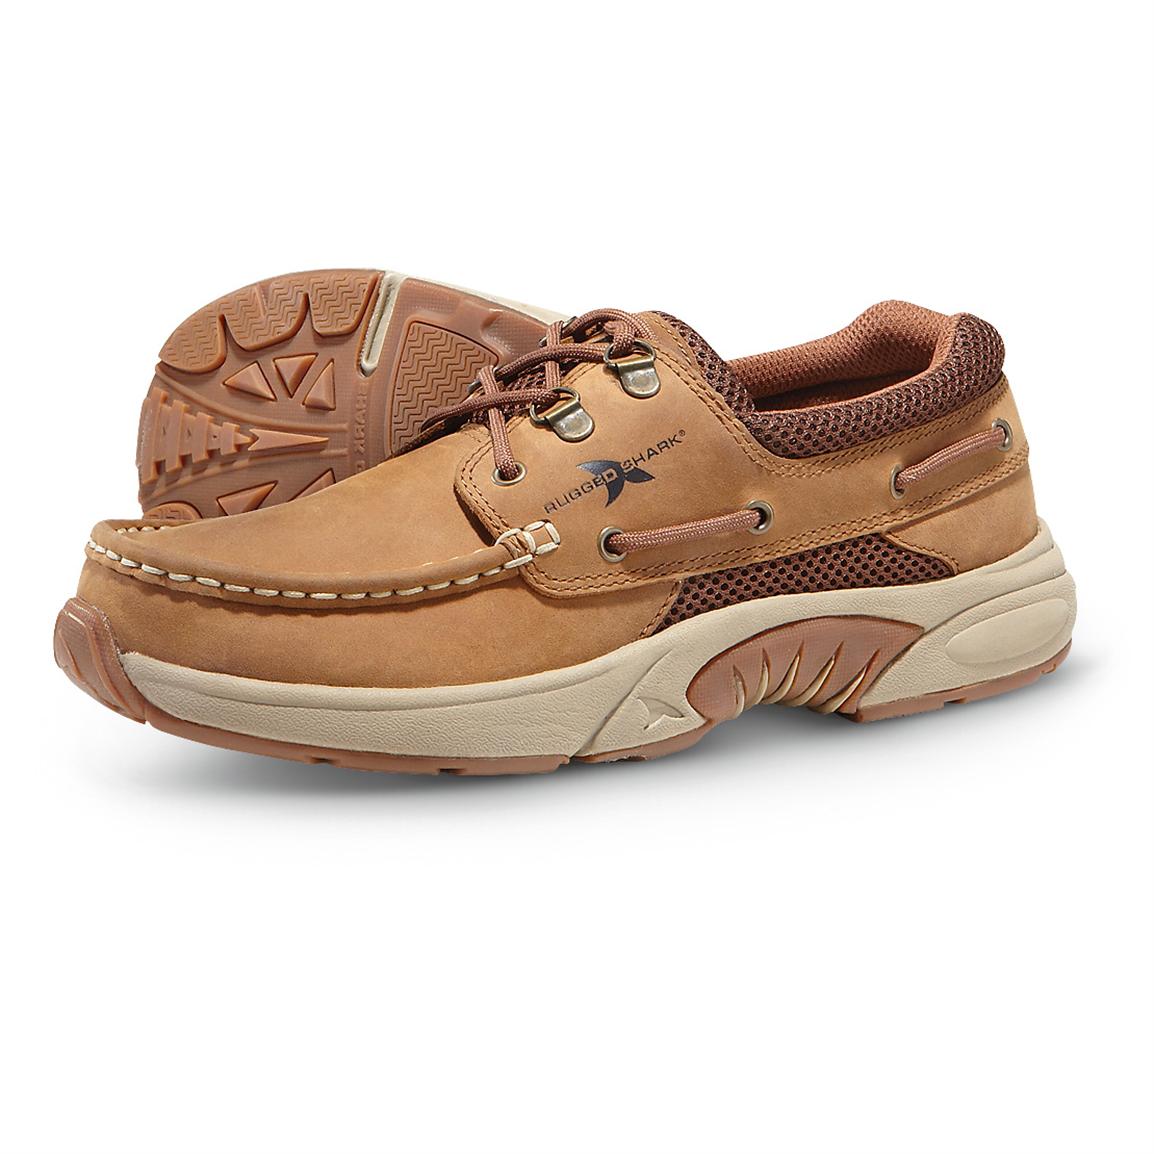 rugged shark classic boat shoes